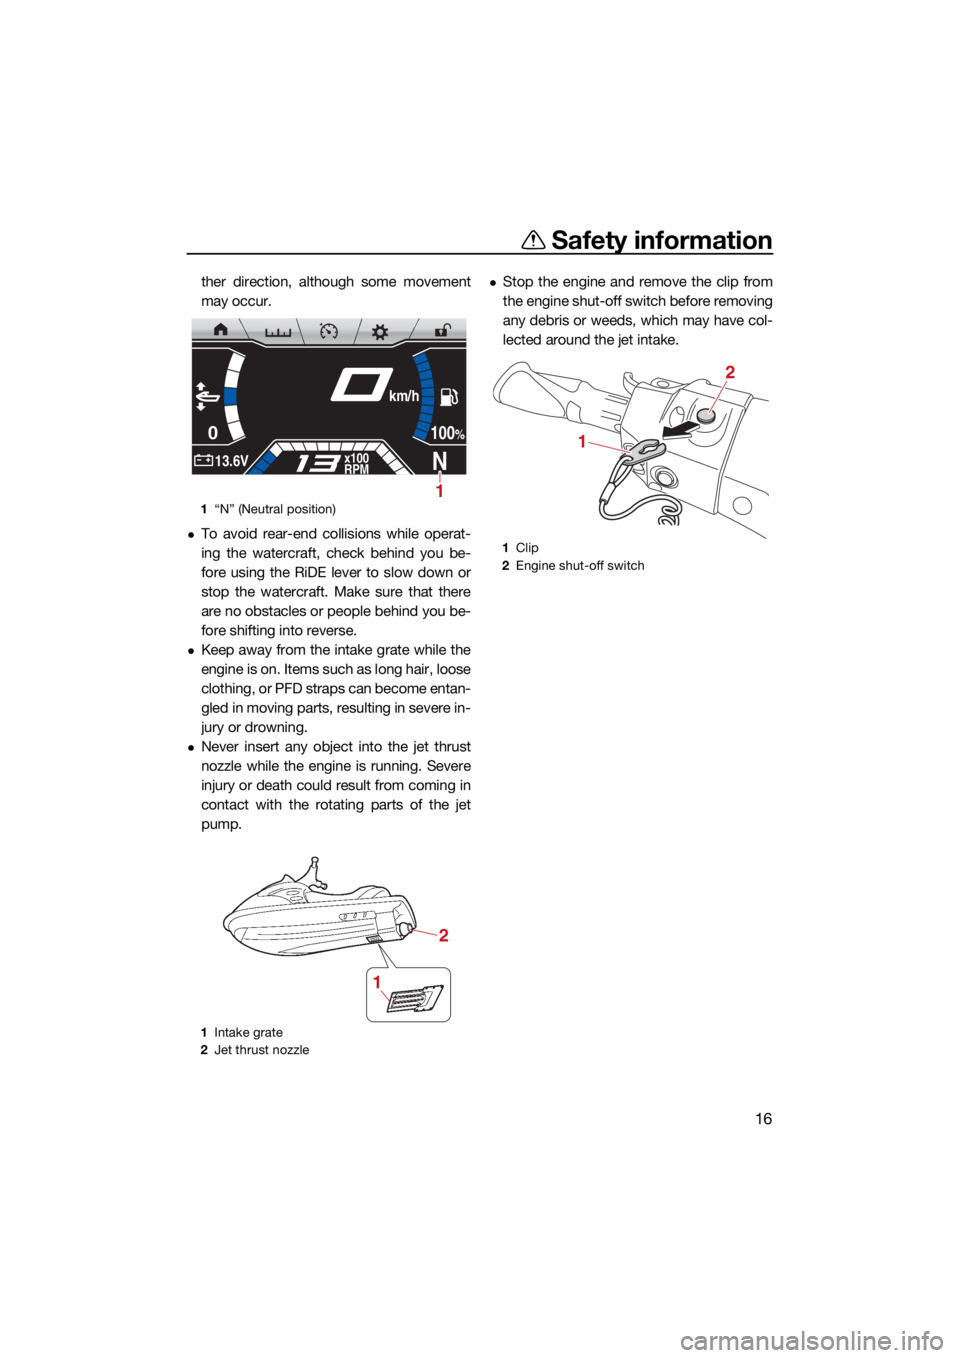 YAMAHA FX HO CRUISER 2021  Owners Manual Safety information
16
ther direction, although some movement
may occur.
To avoid rear-end collisions while operat-
ing the watercraft, check behind you be-
fore using the RiDE lever to slow down or